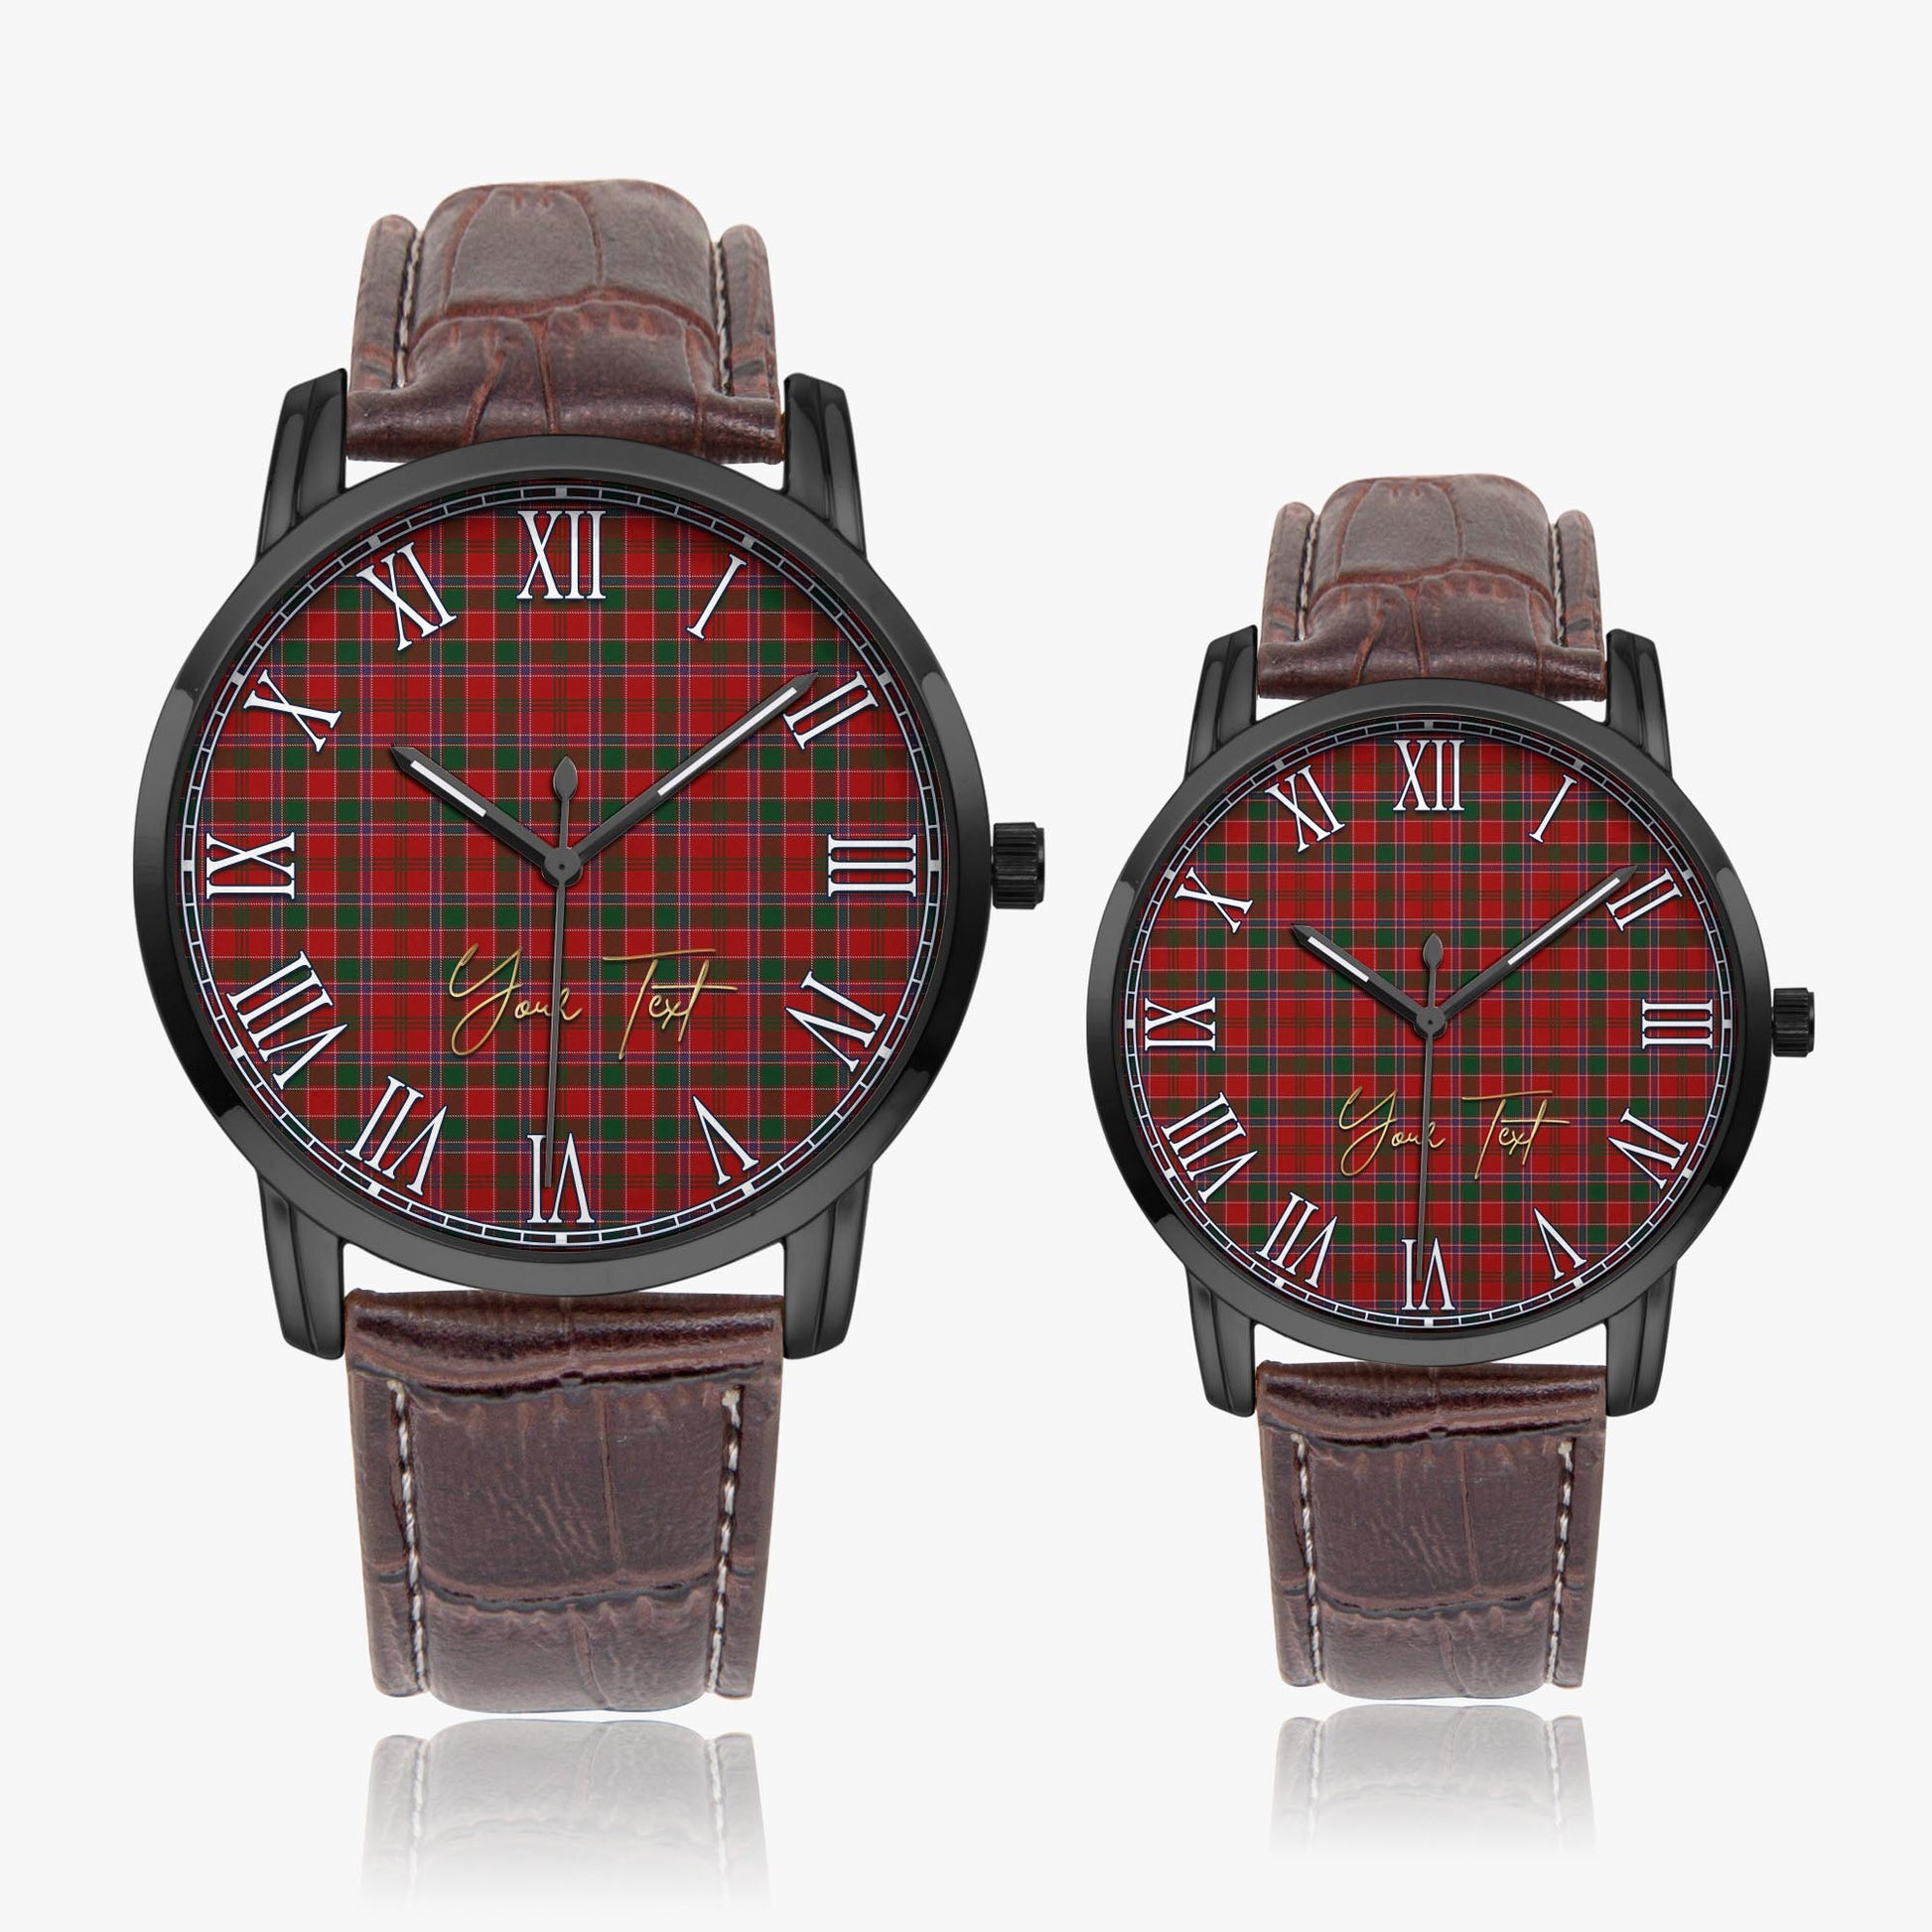 Dalzell (Dalziel) Tartan Personalized Your Text Leather Trap Quartz Watch Wide Type Black Case With Brown Leather Strap - Tartanvibesclothing